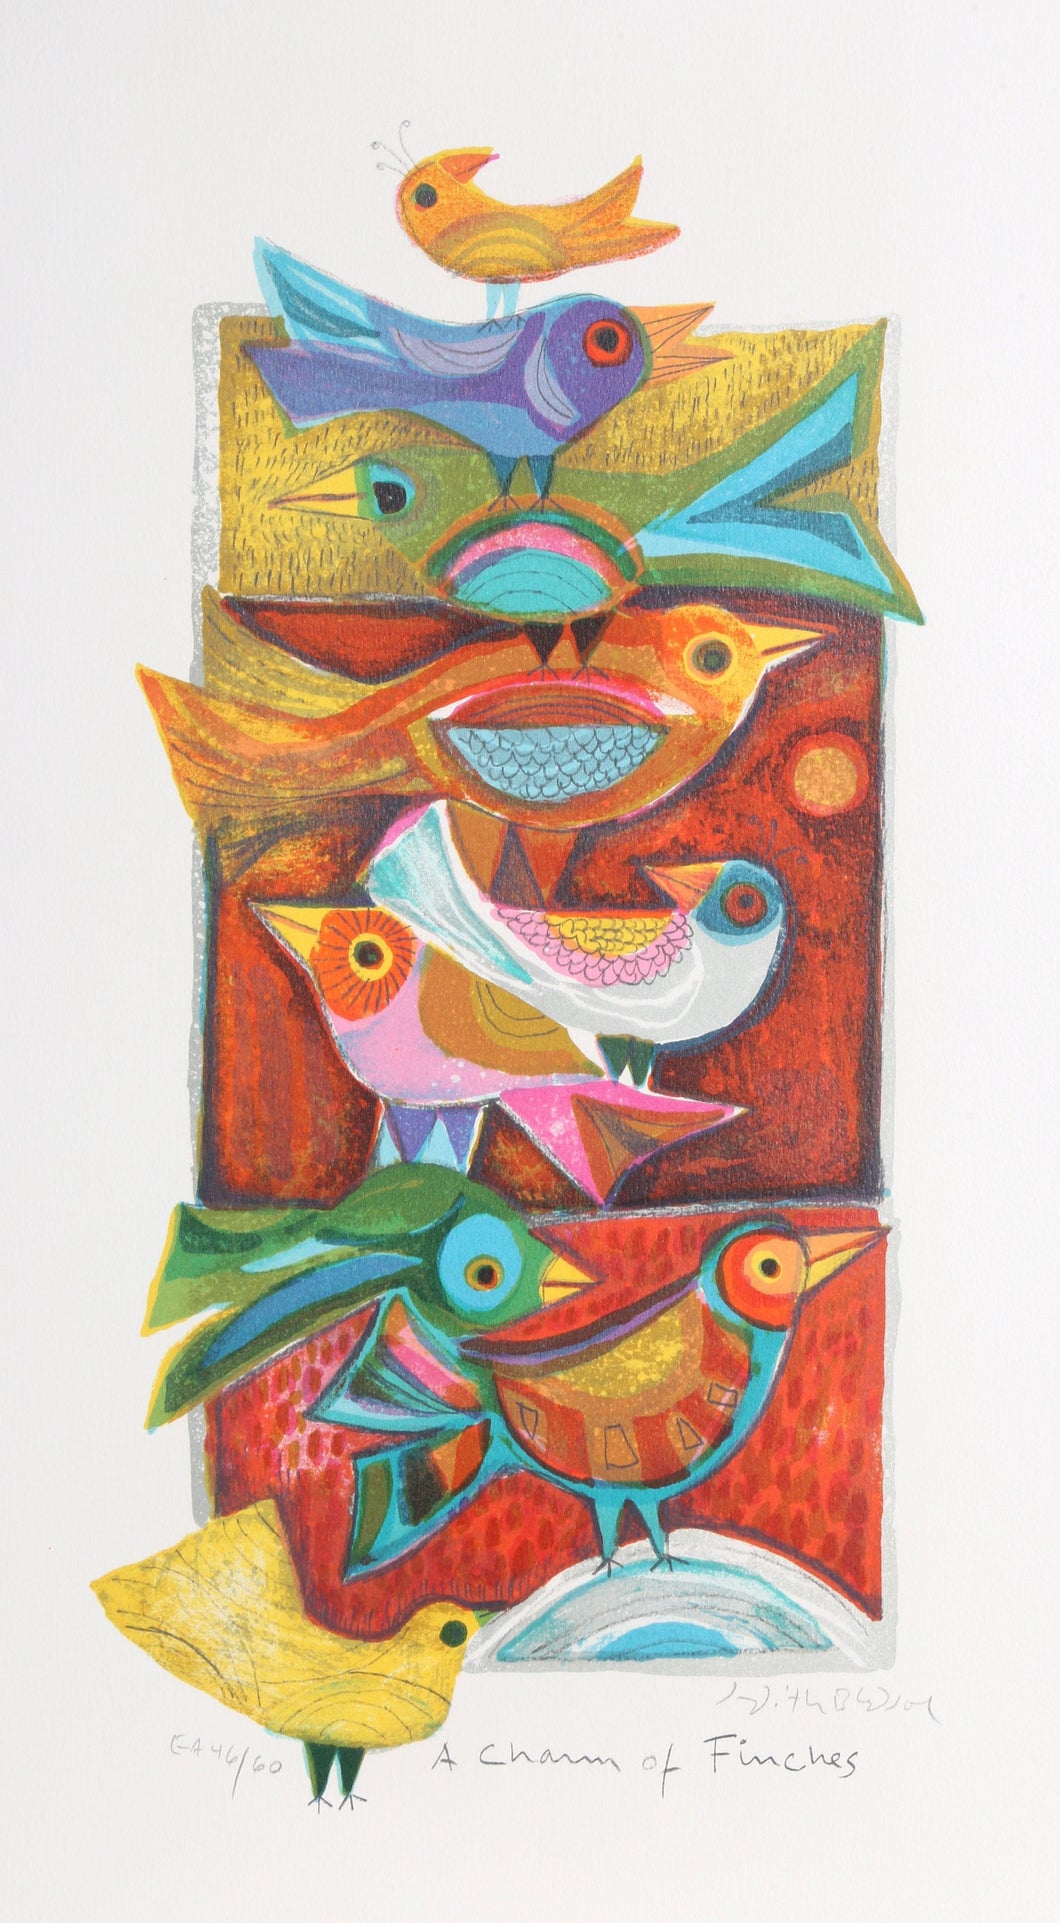 A Charm of Finches Lithograph | Judith Bledsoe,{{product.type}}